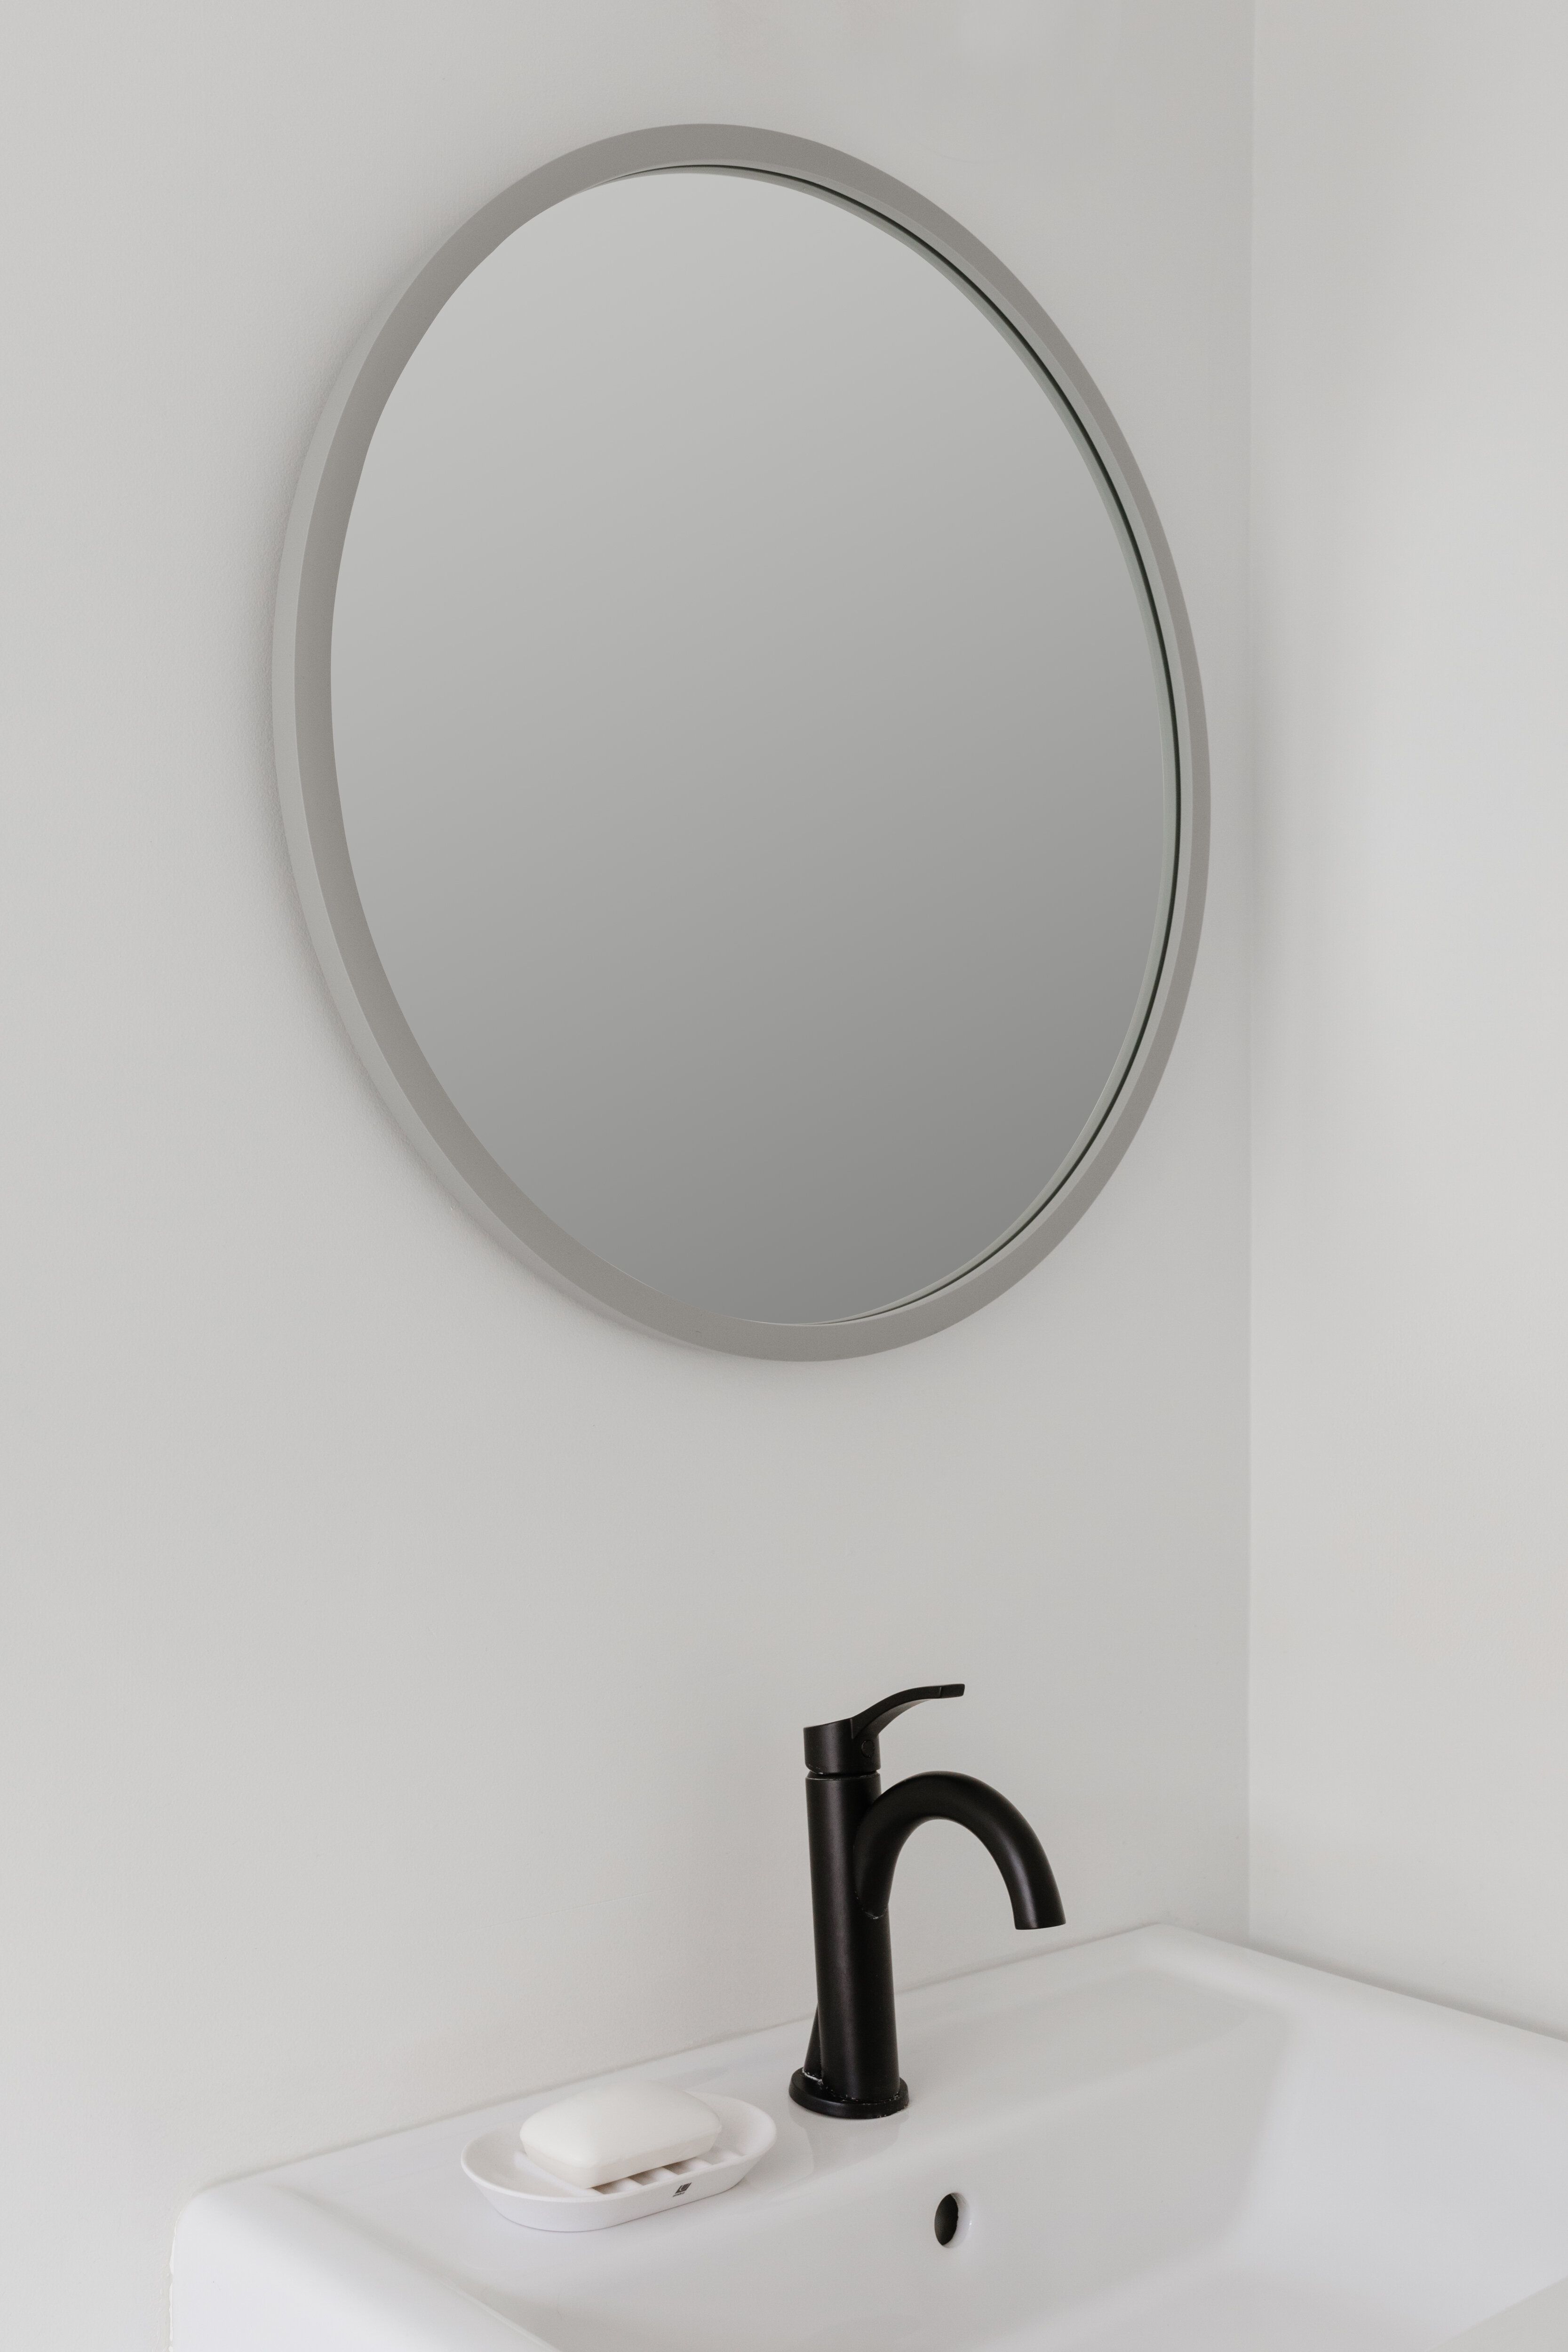 Umbra Hub Modern And Contemporary Accent Mirror Throughout Hub Modern And Contemporary Accent Mirrors (View 17 of 20)